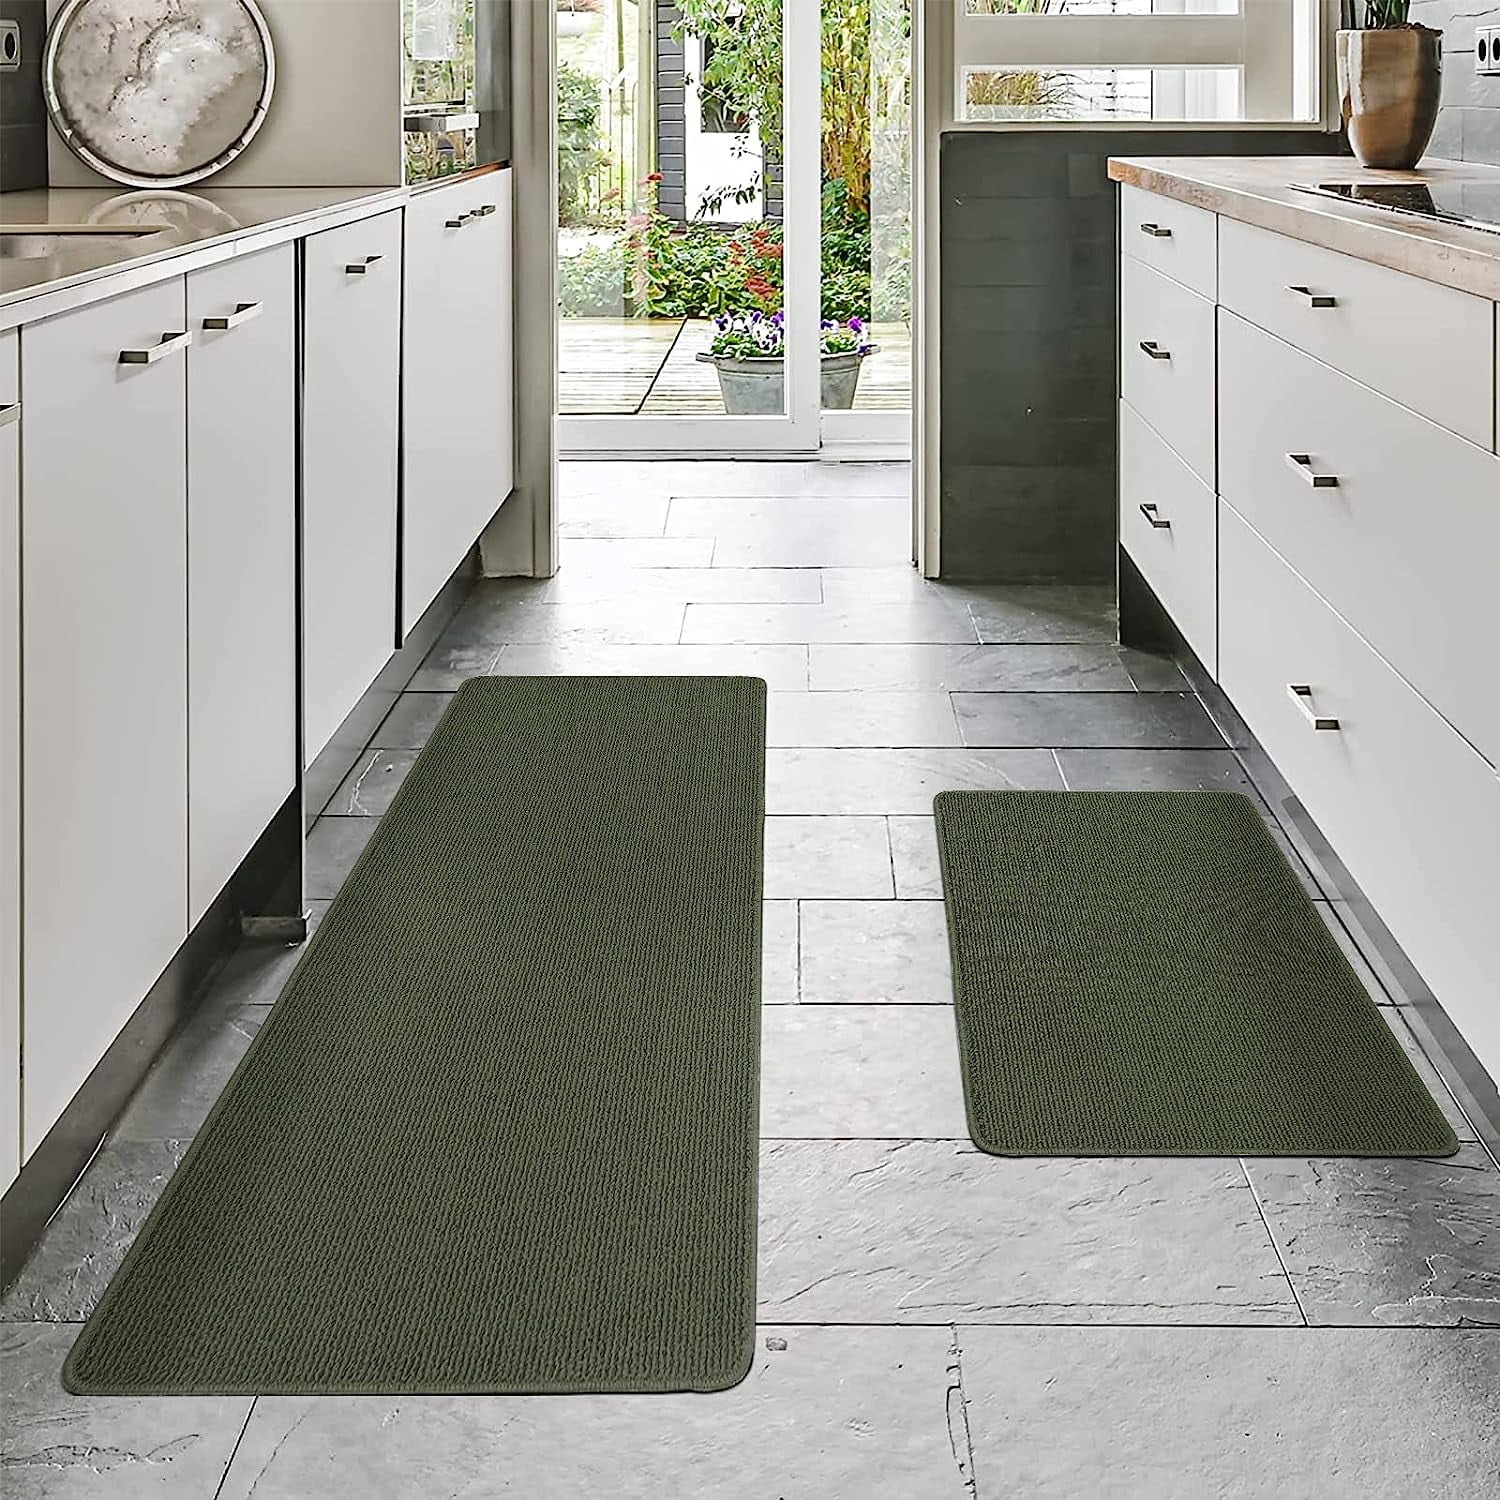 BEQHAUSE Kitchen Floor Mat Dark Grey Kitchen Rugs Non Slip Machine Washable  Kitchen Mat Set of 2 with TPR Backing 100% Polyester Soft and Absorbent